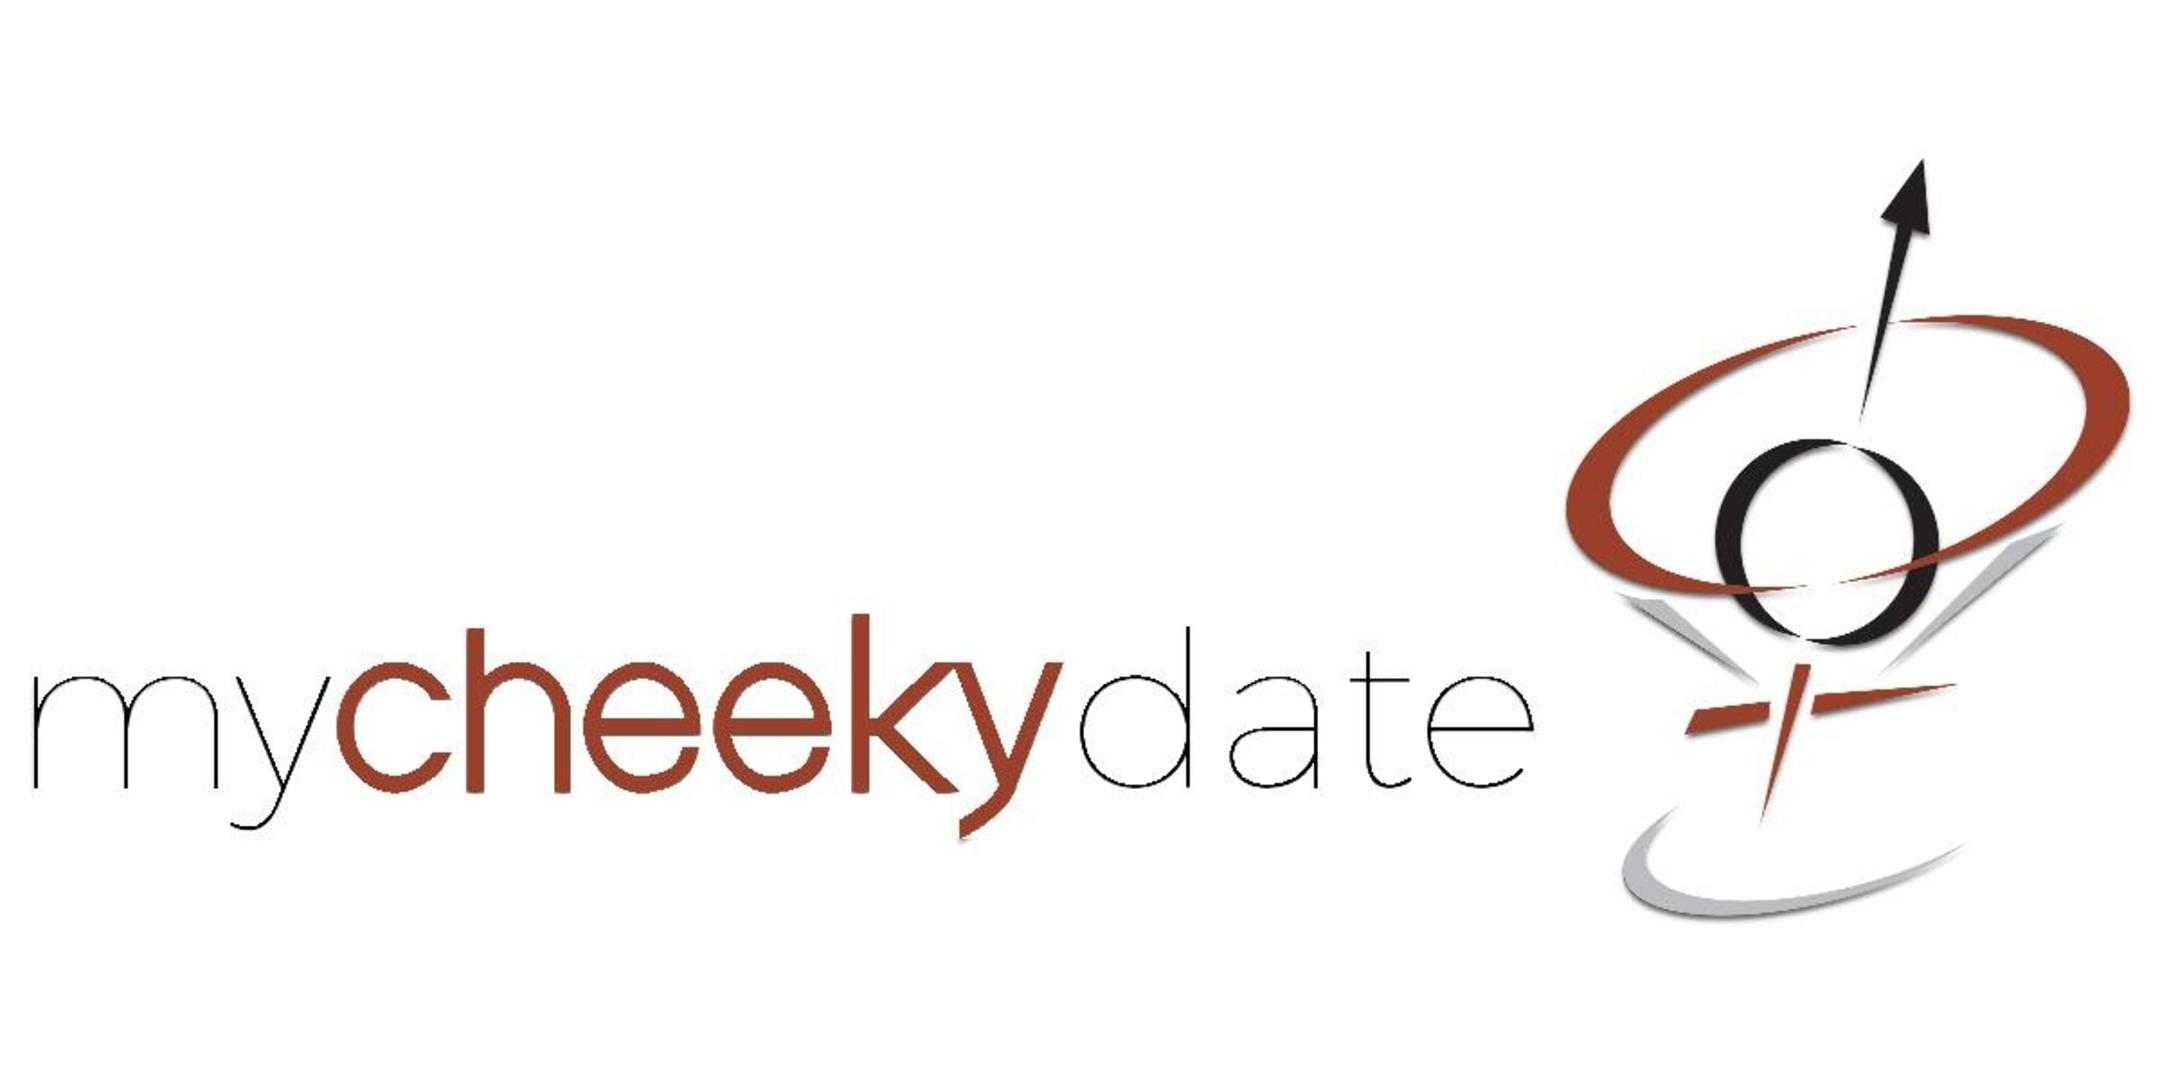 Speed Dating UK Style | Singles Events in Raleigh | Let's Get Cheeky!